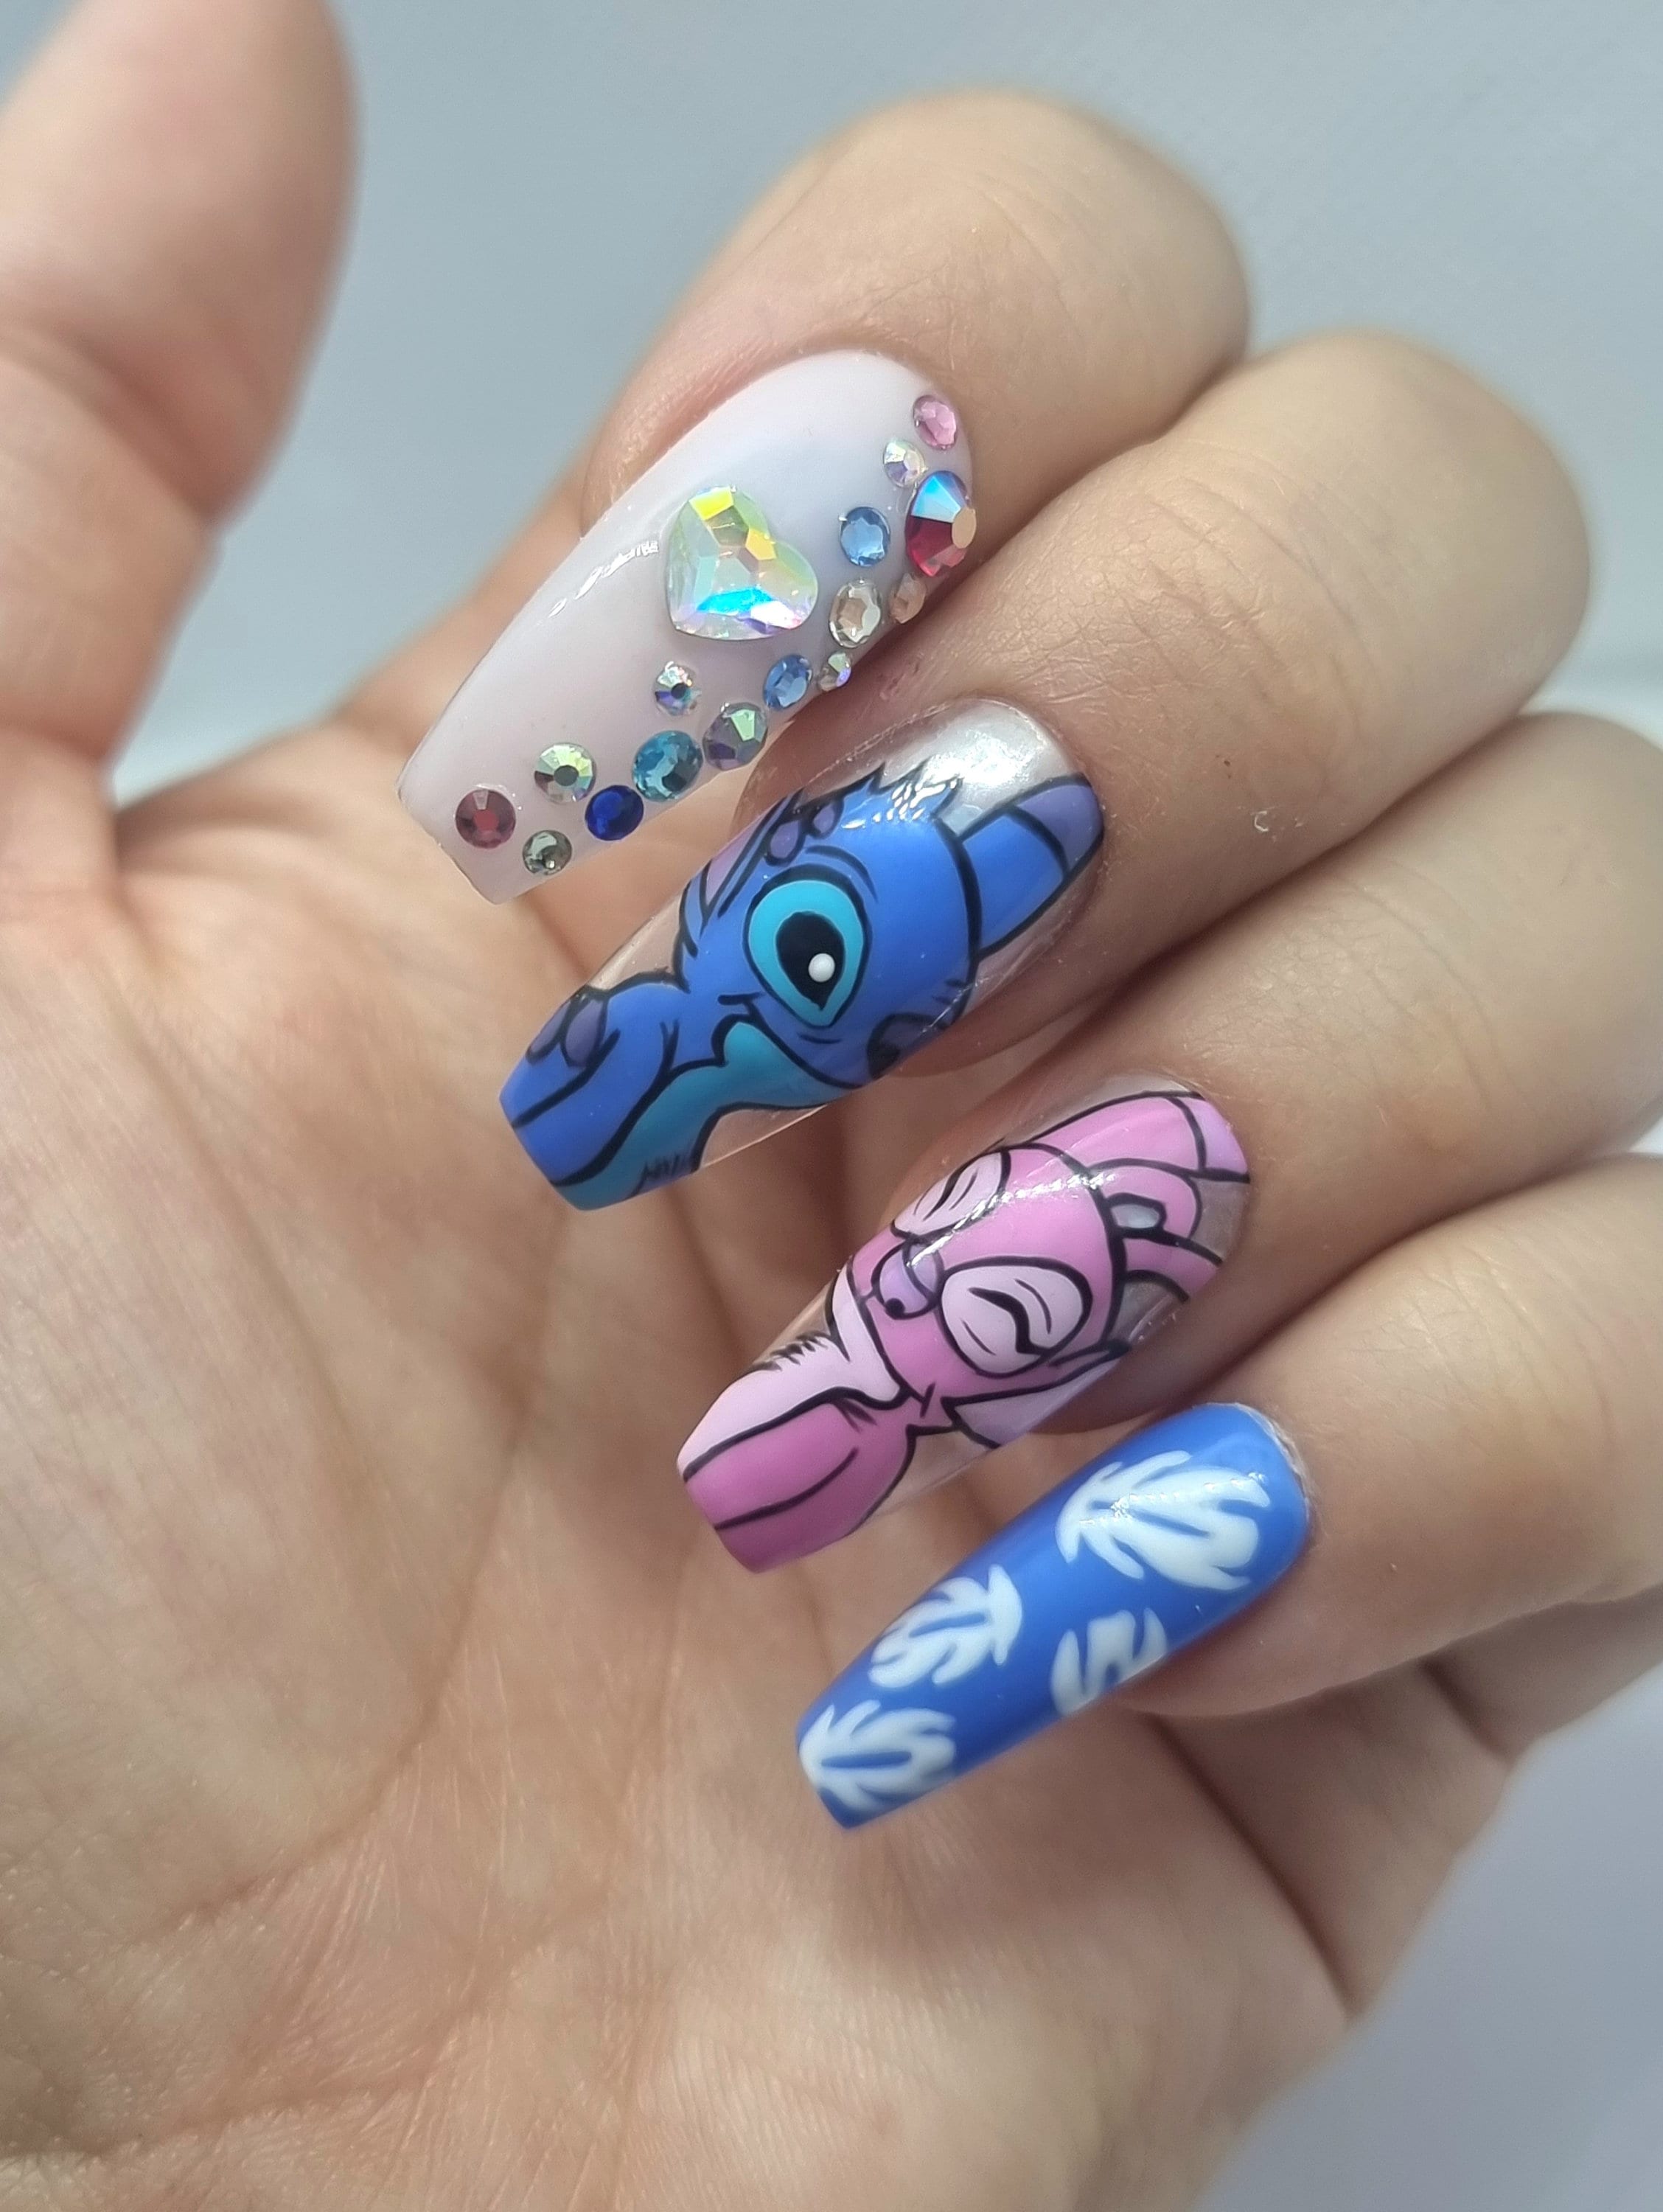 Lilo and Stitch Nail Art Stickers Transfers Decals Set of 64